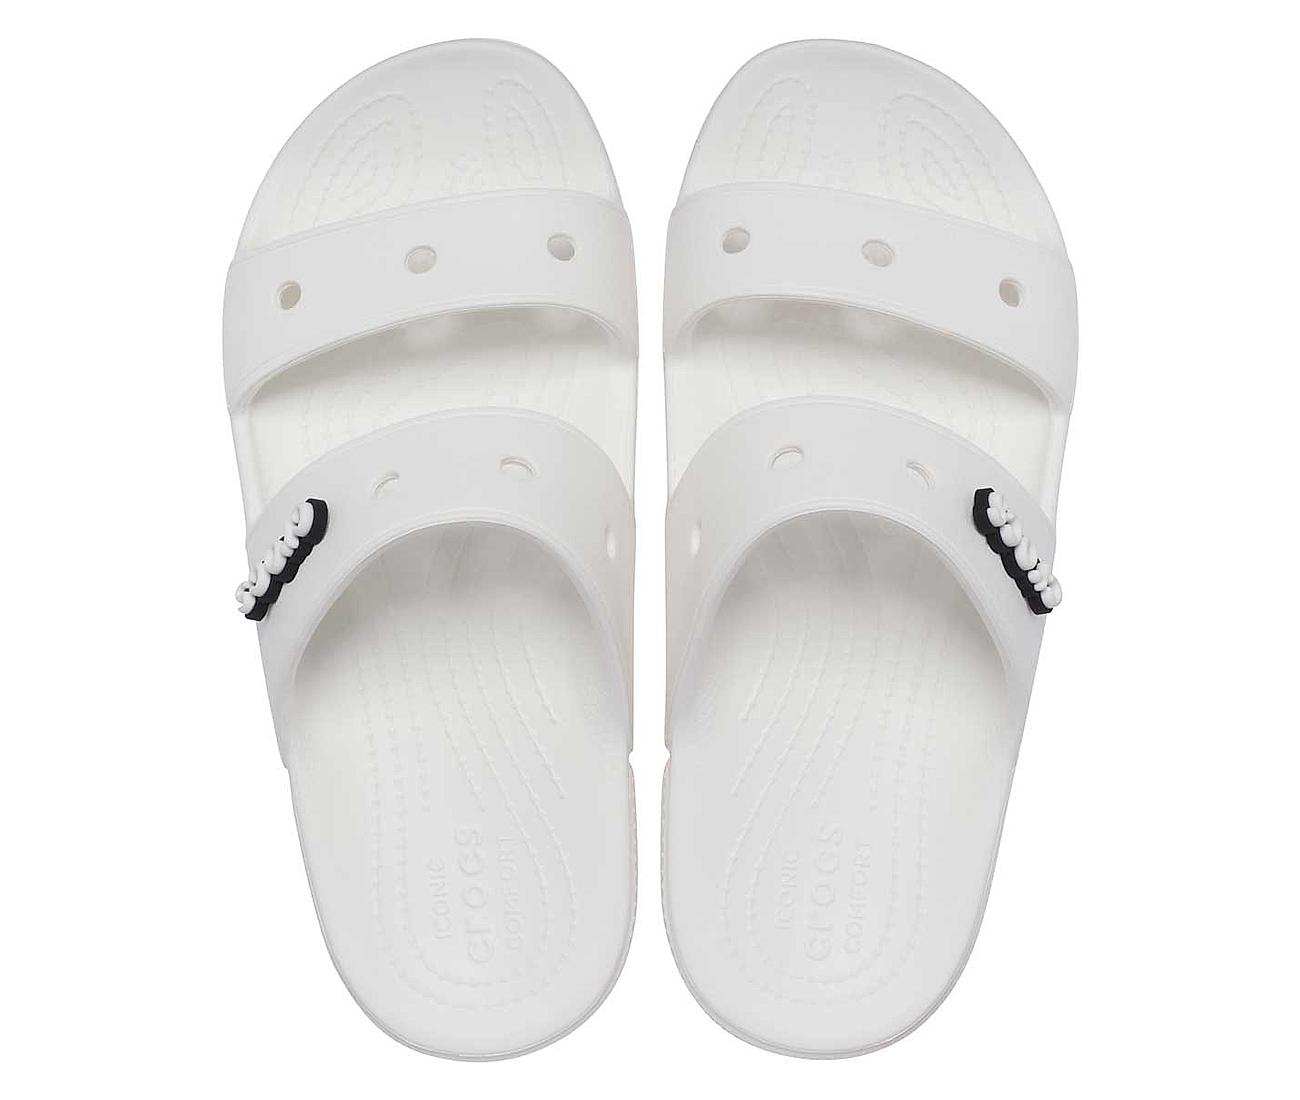 Crocs Slippers in Nigeria for sale ▷ Prices on Jiji.ng